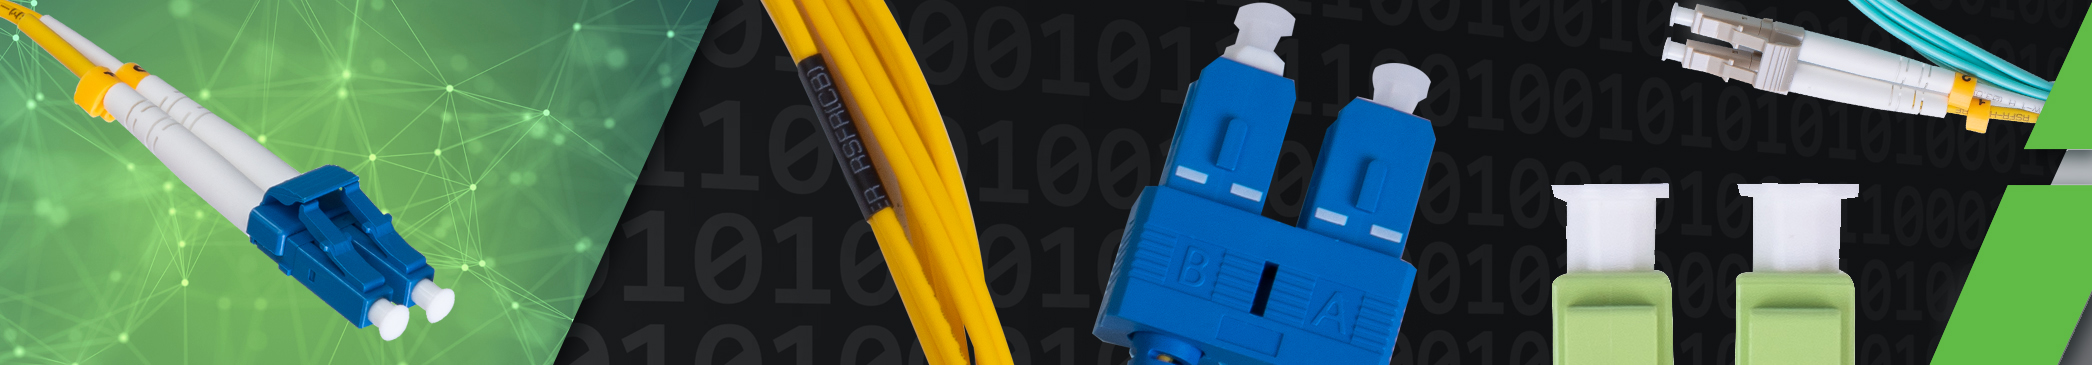 VGS Fiber Patch Cables & Cleaning Tools